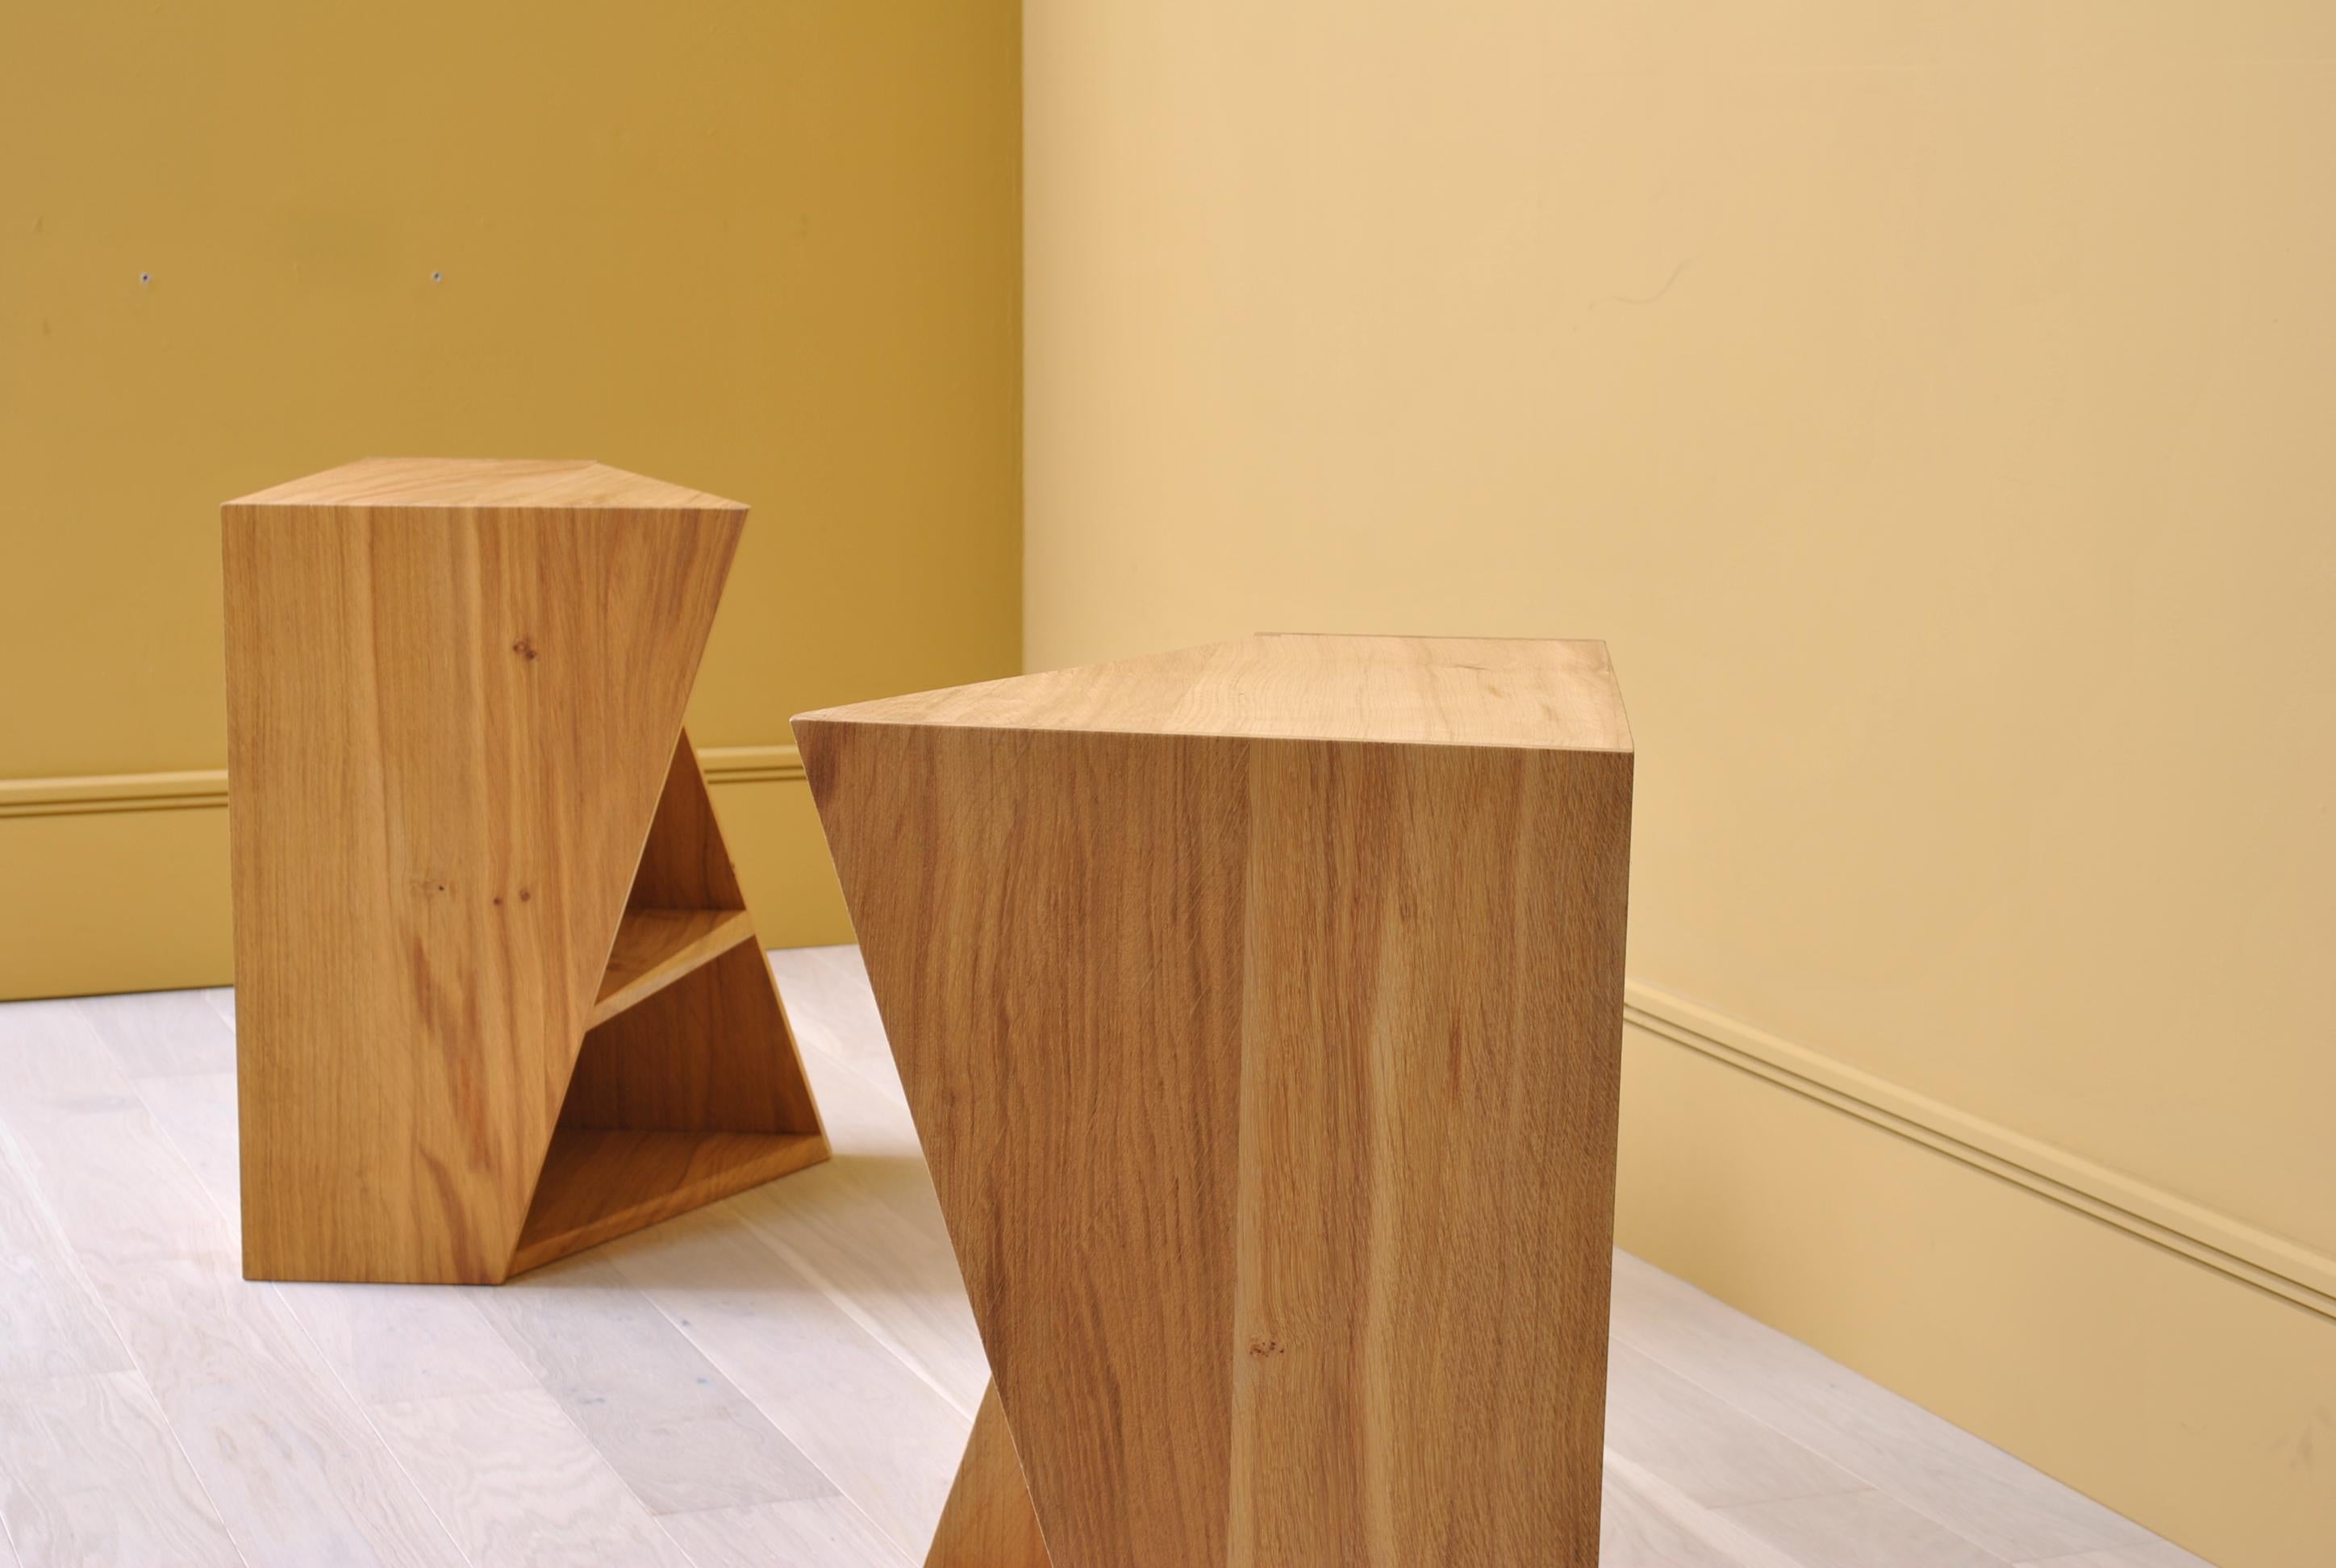 English Handcrafted Postmodern End Tables For Sale